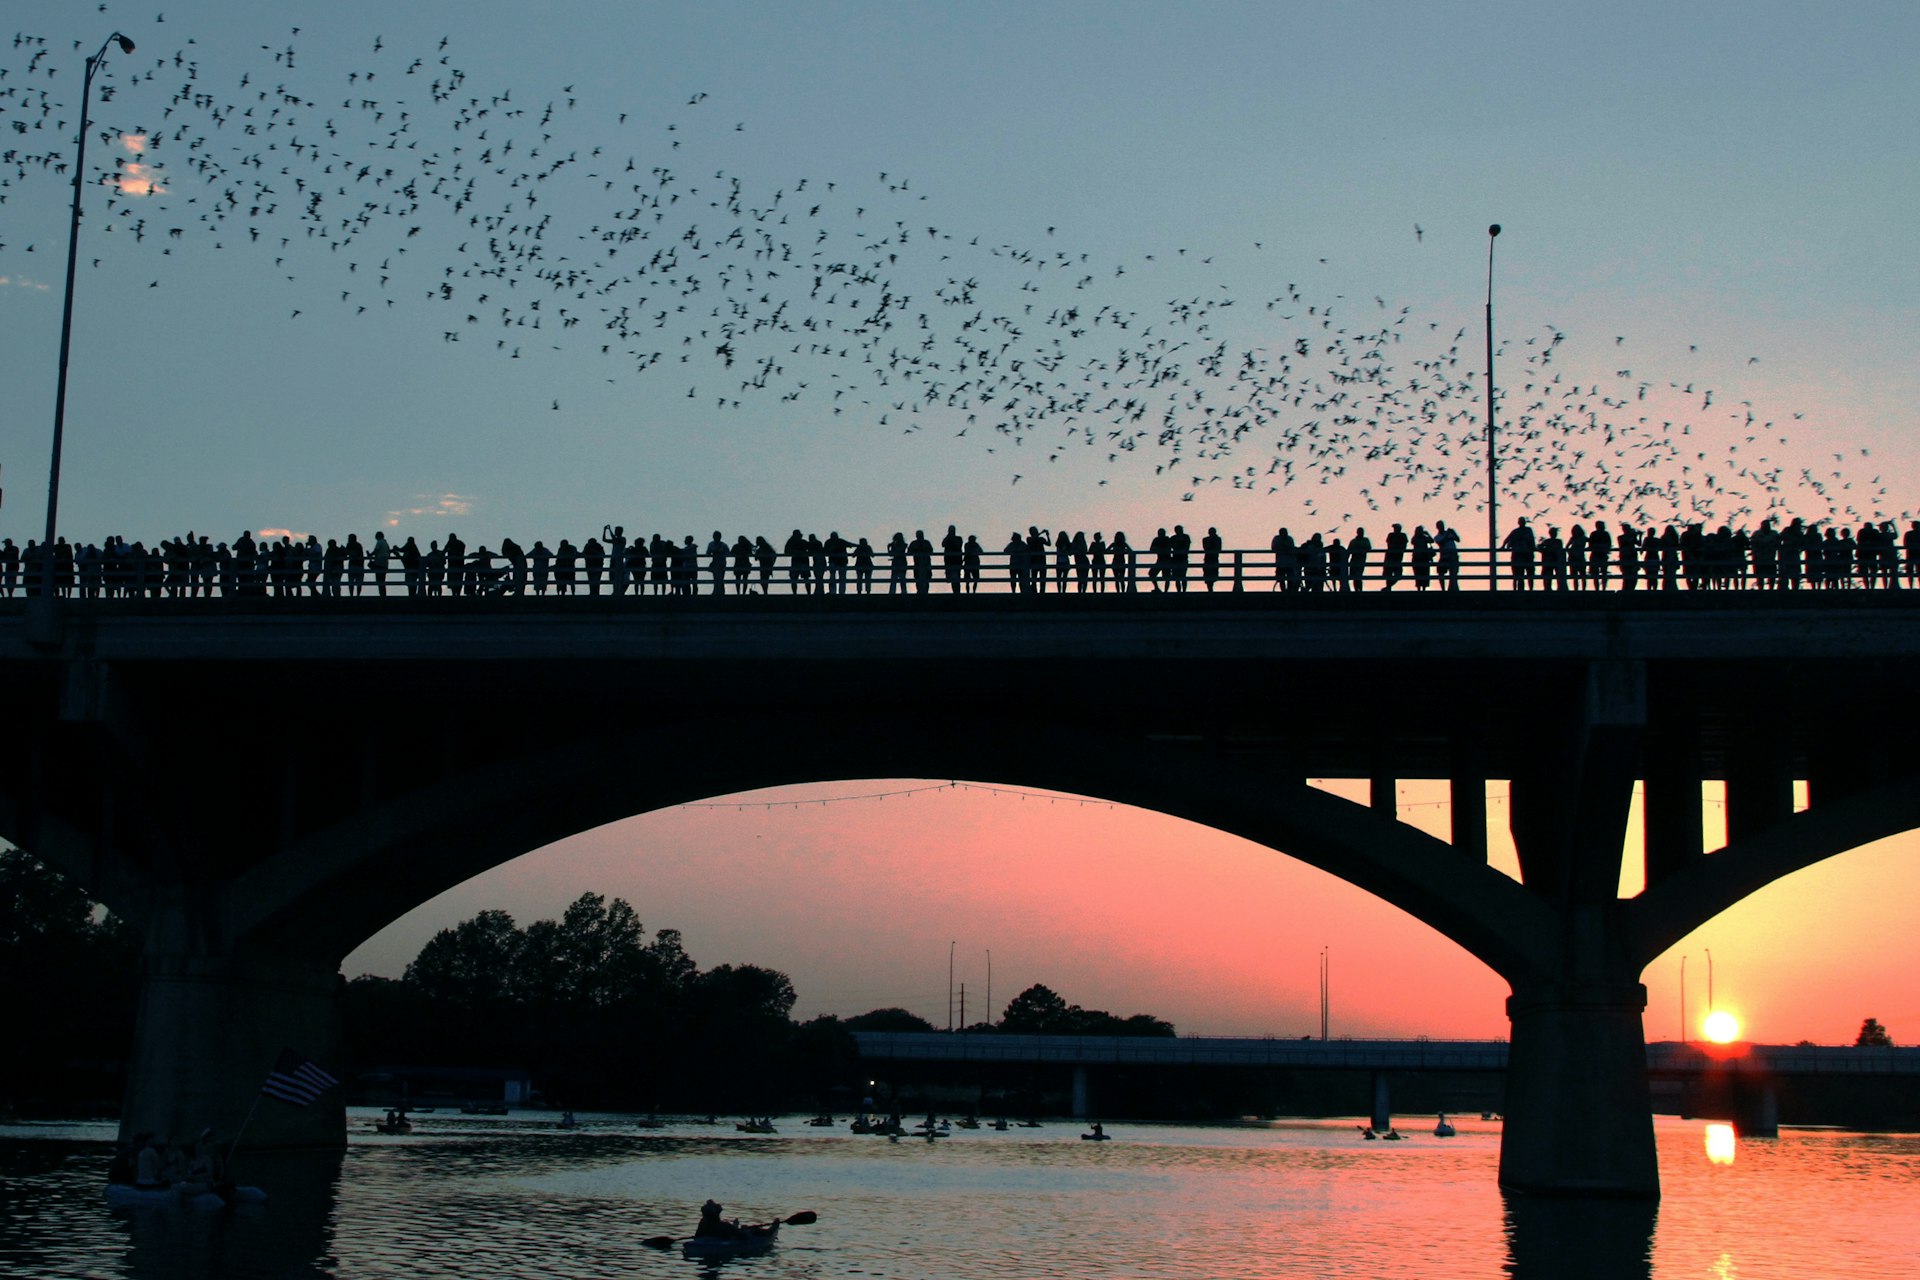 The bats of Congress Avenue Bridge take off at sunset in Austin, Texas, USA